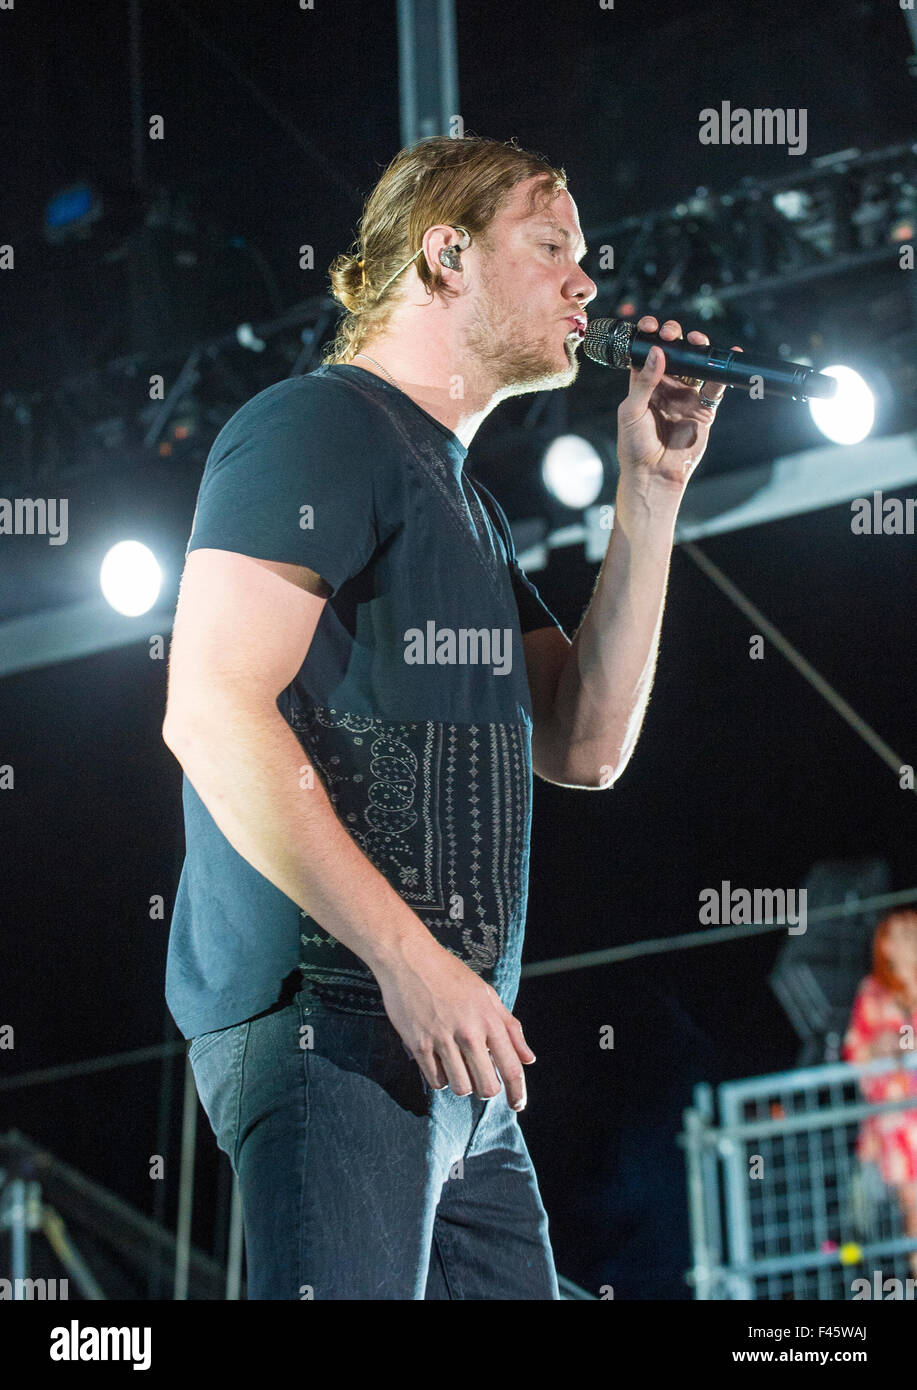 Dan Reynolds of Imagine Dragons performs on stage during Life Is Beautiful Festival in Las Vegas Stock Photo